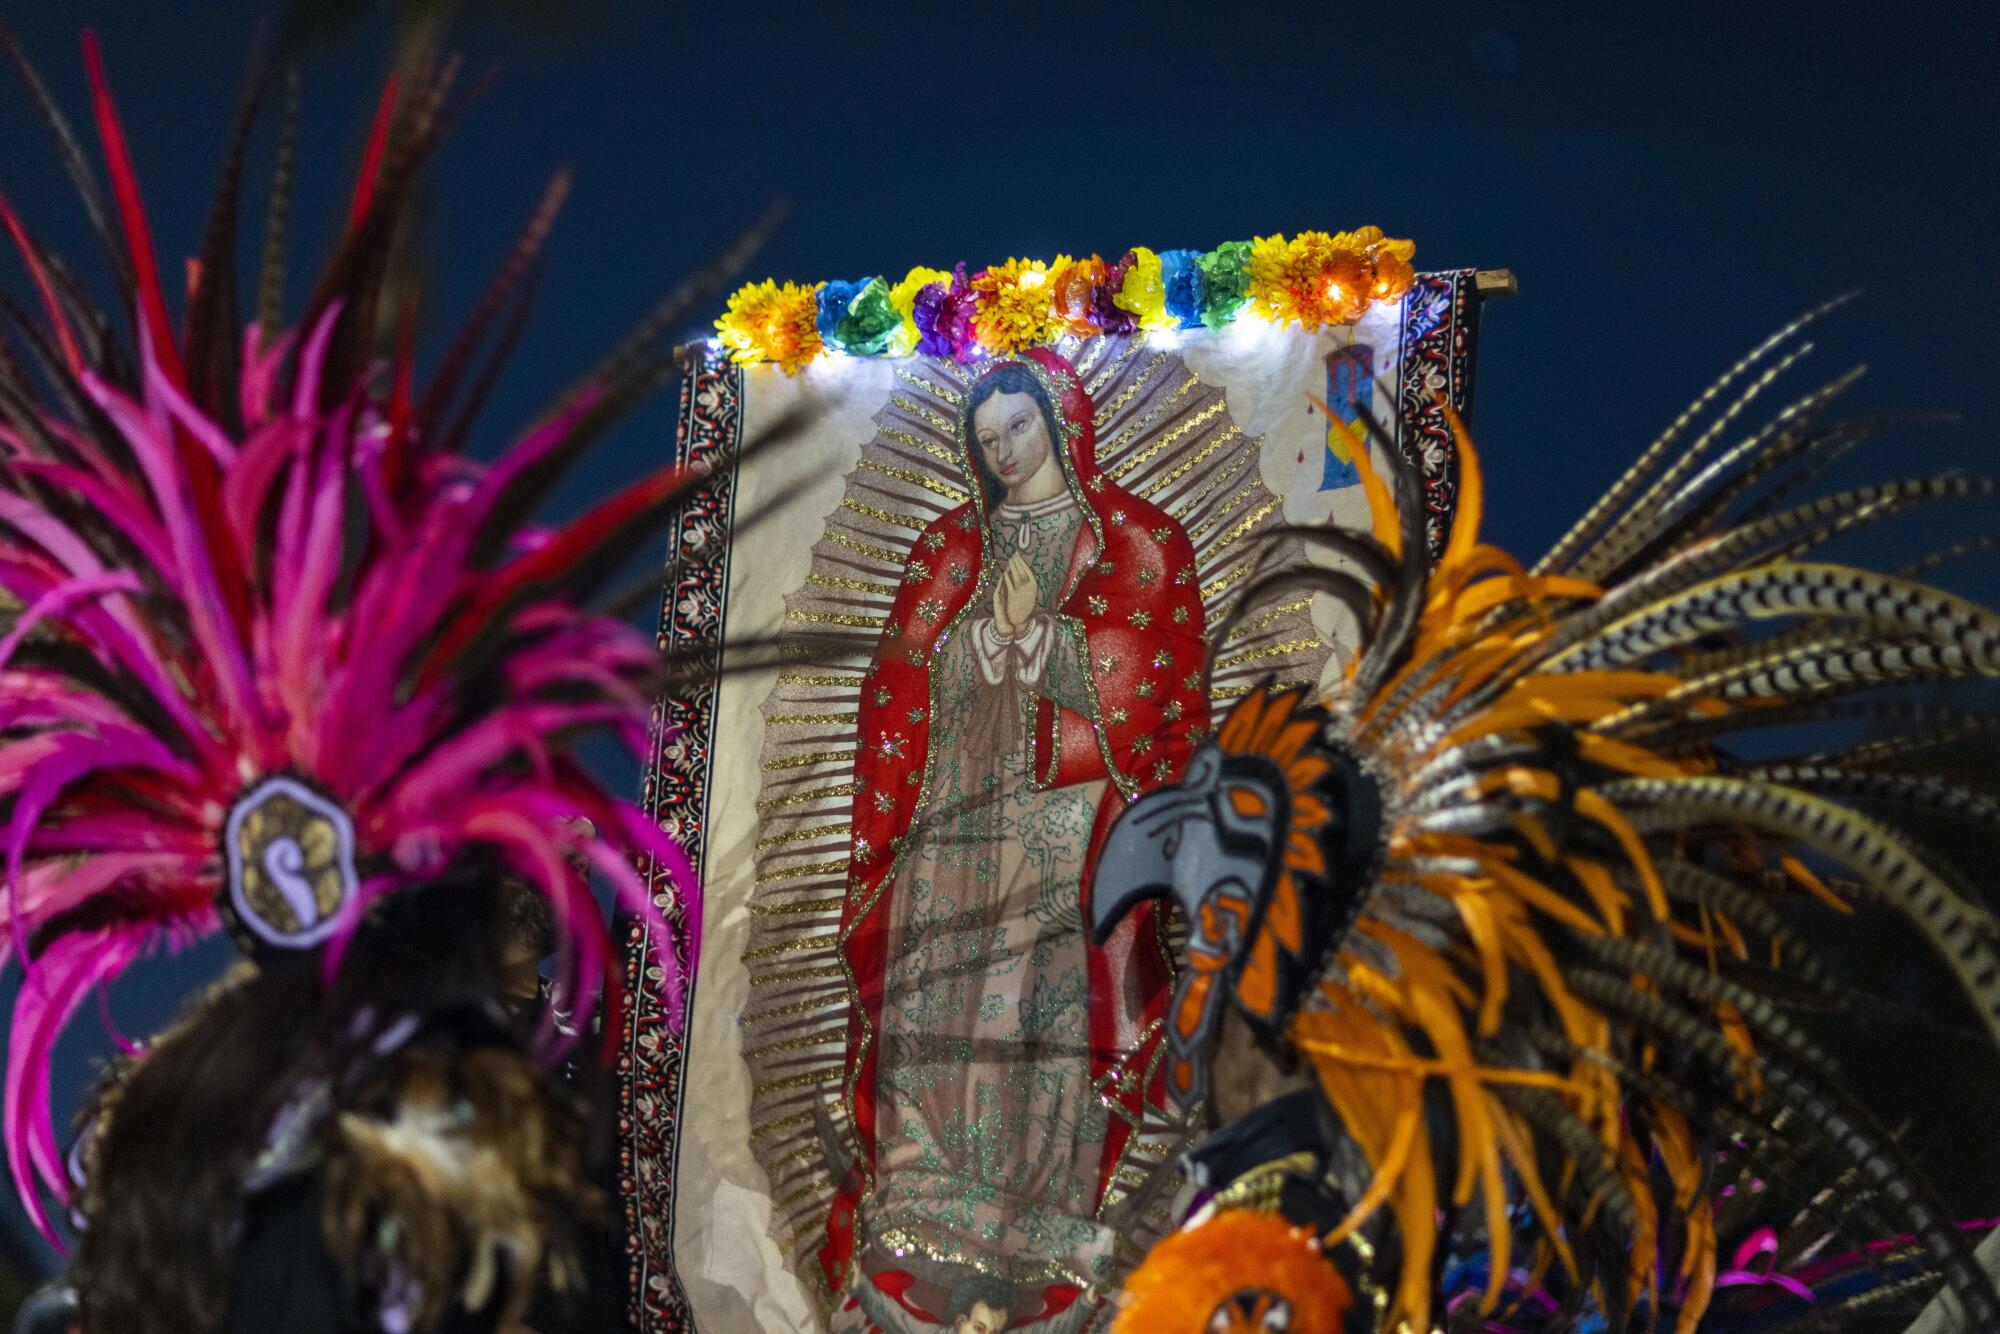 Images of La Virgen de Guadalupe are displayed during an Aztec dance.